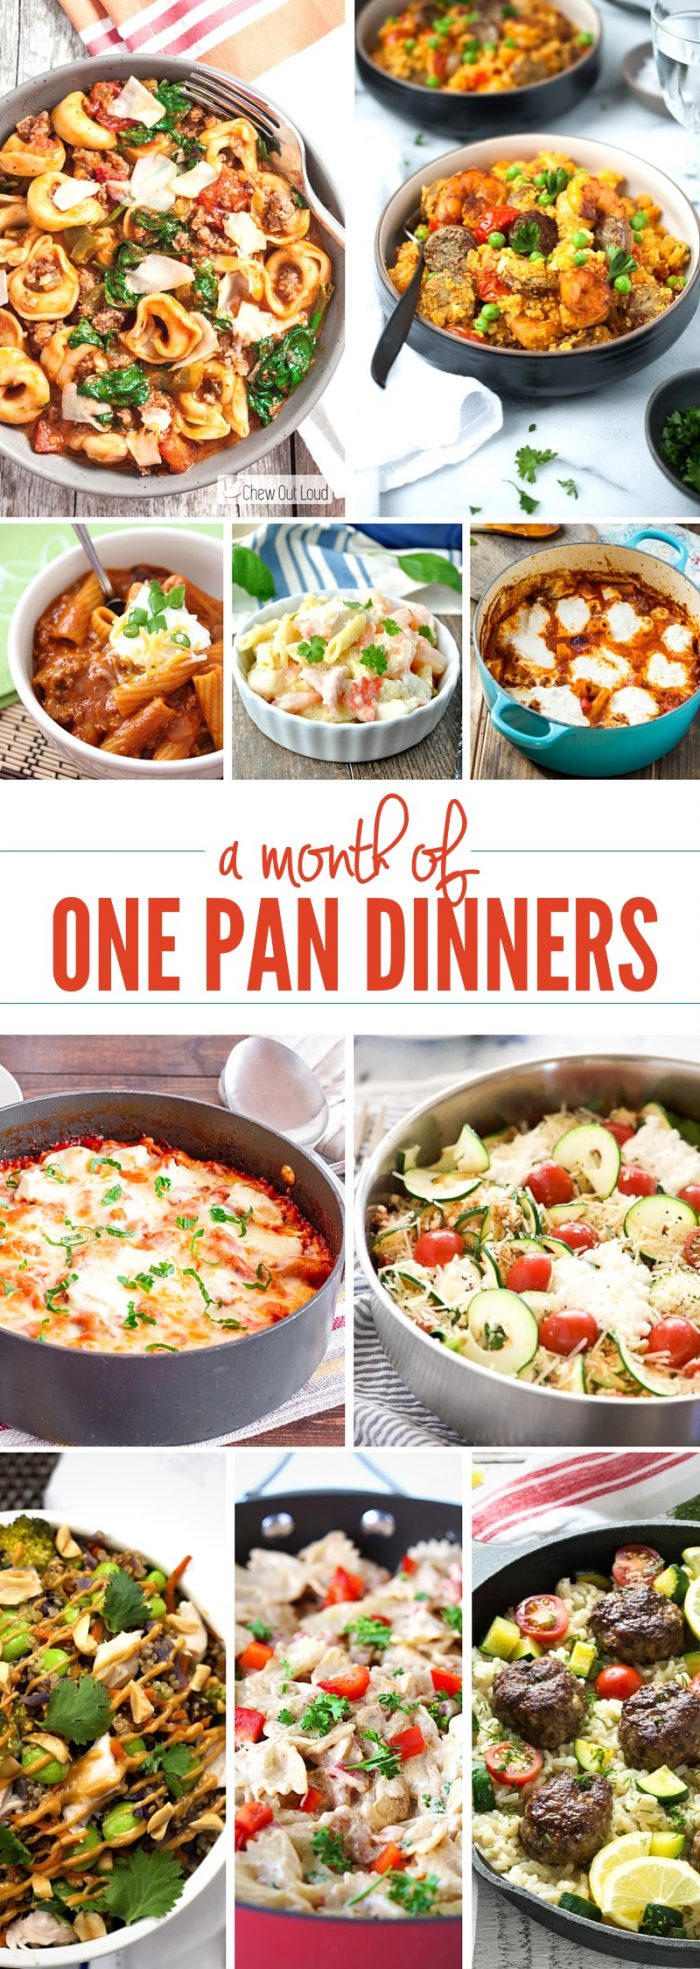 Are you tired of making the same thing over and over again for dinner? Give these one pan dinners a try!